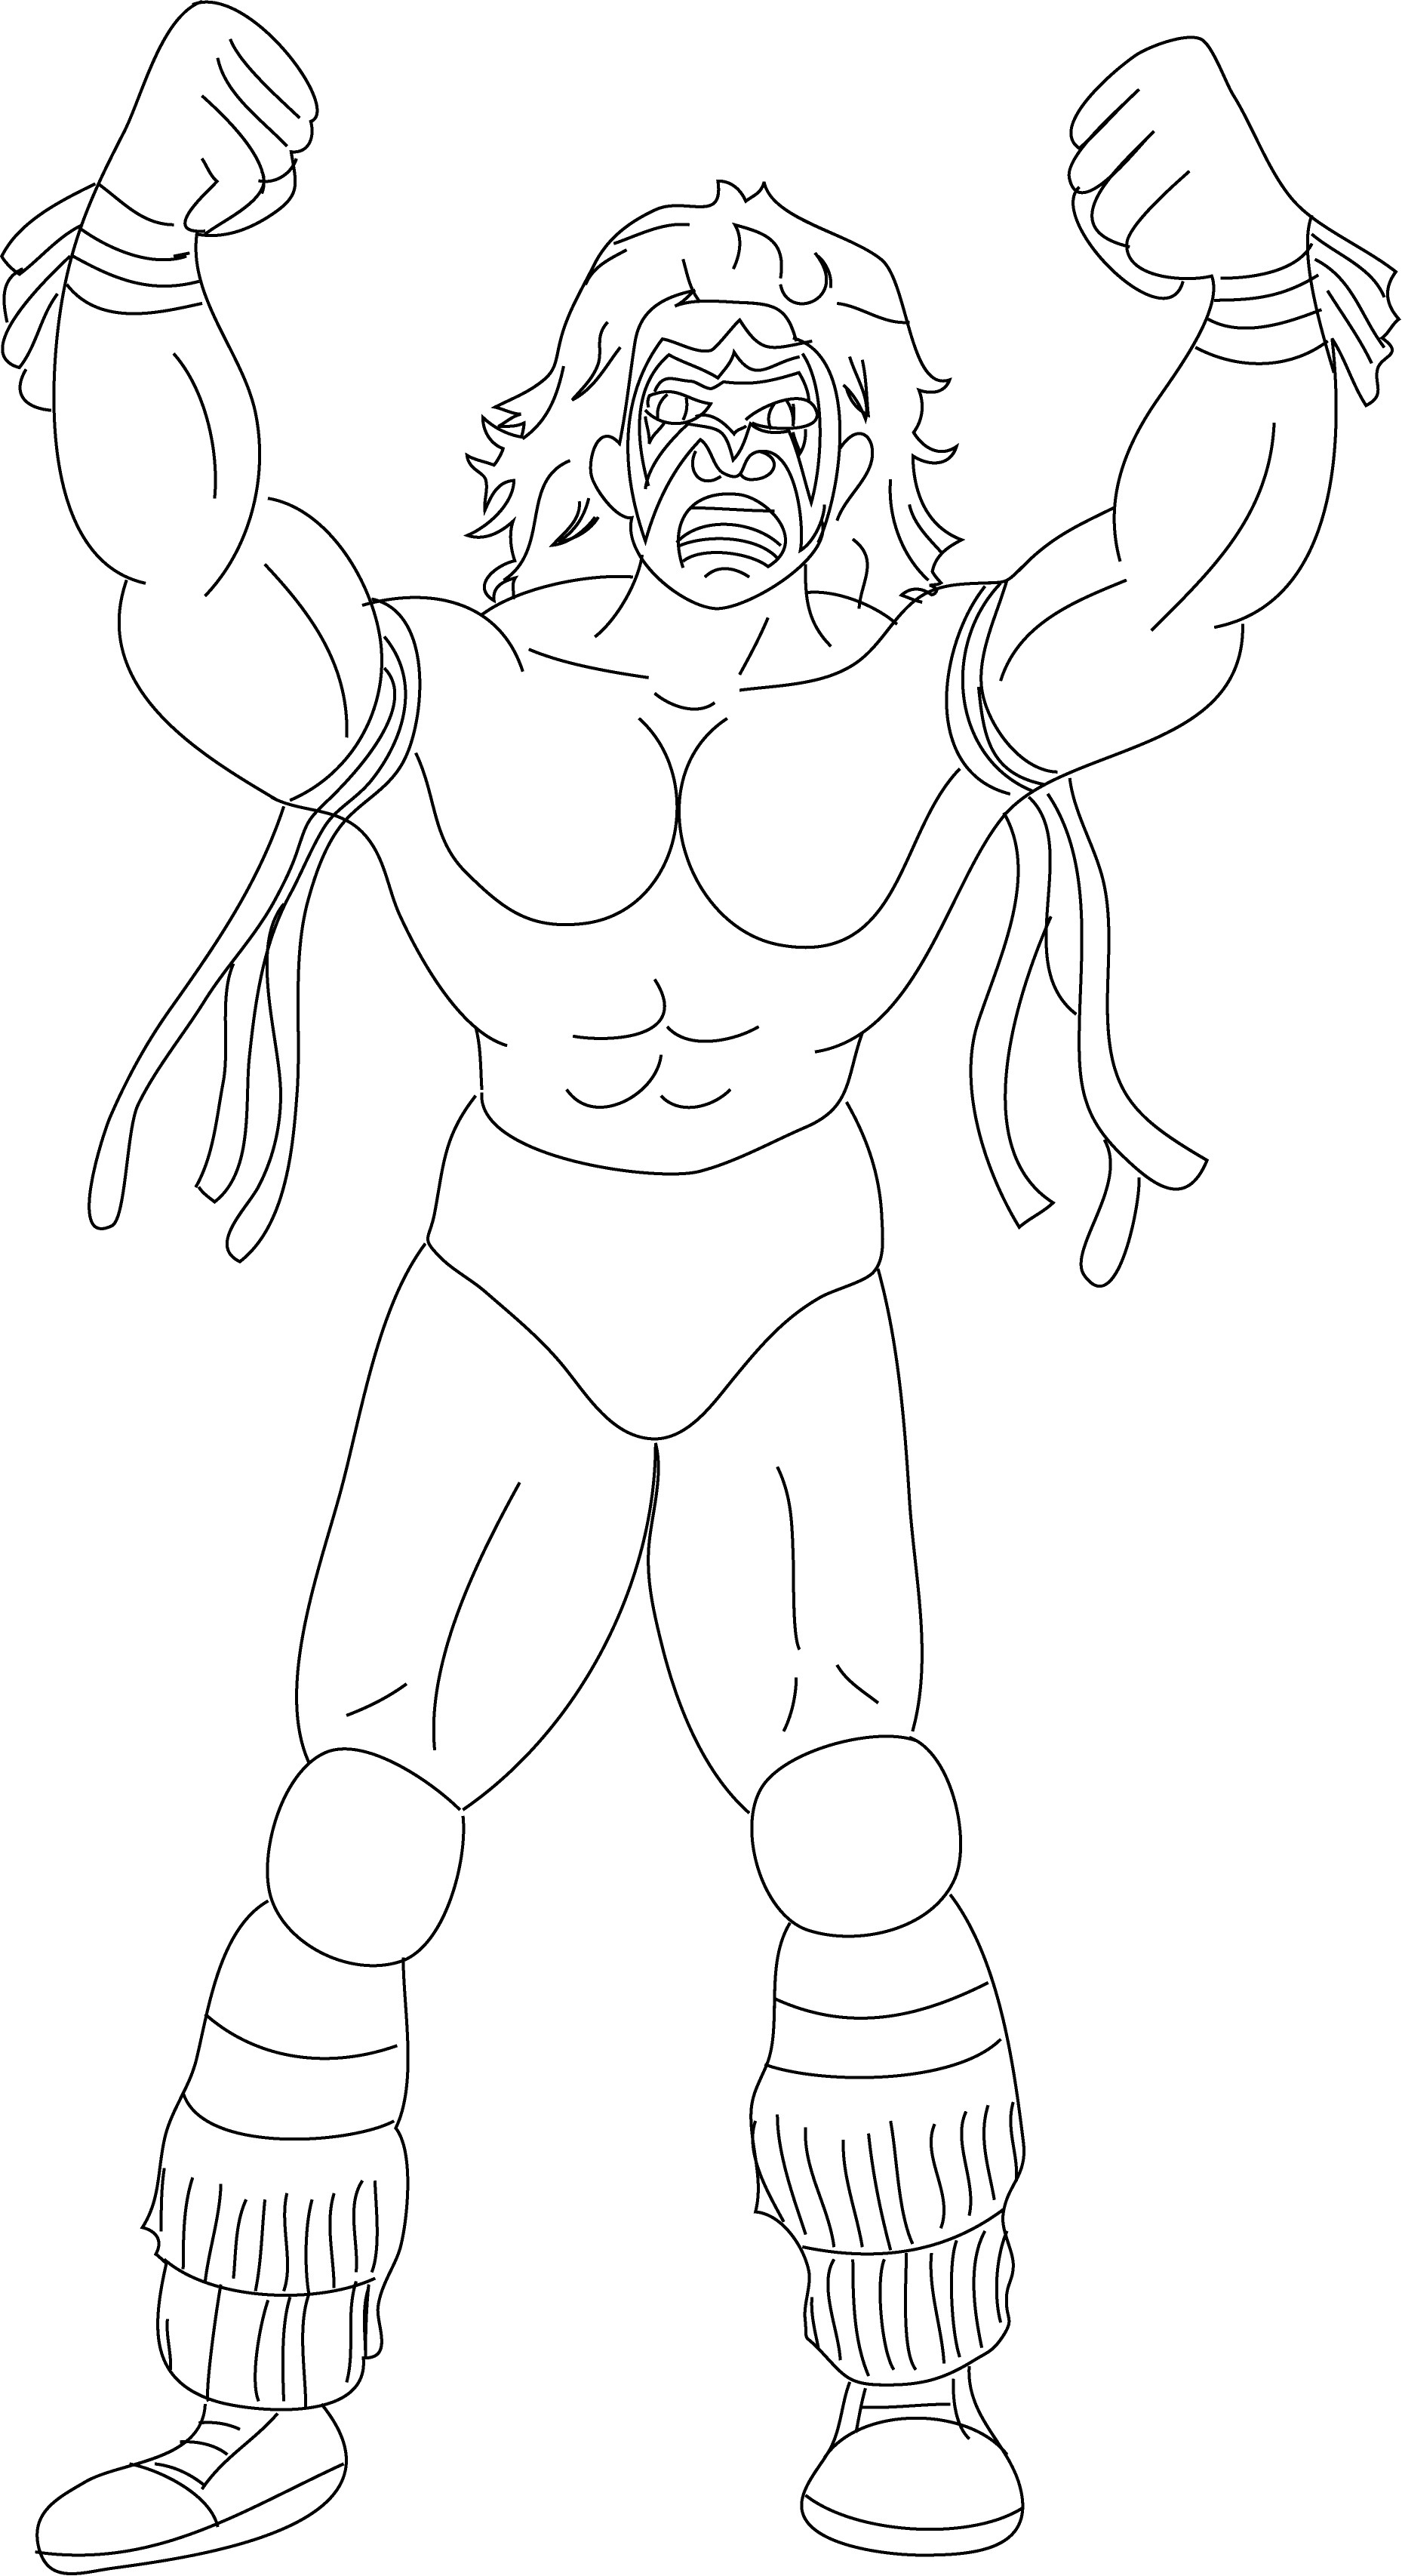 Wwe Coloring Pages For Boys
 WWE Coloring Pages coloringsuite